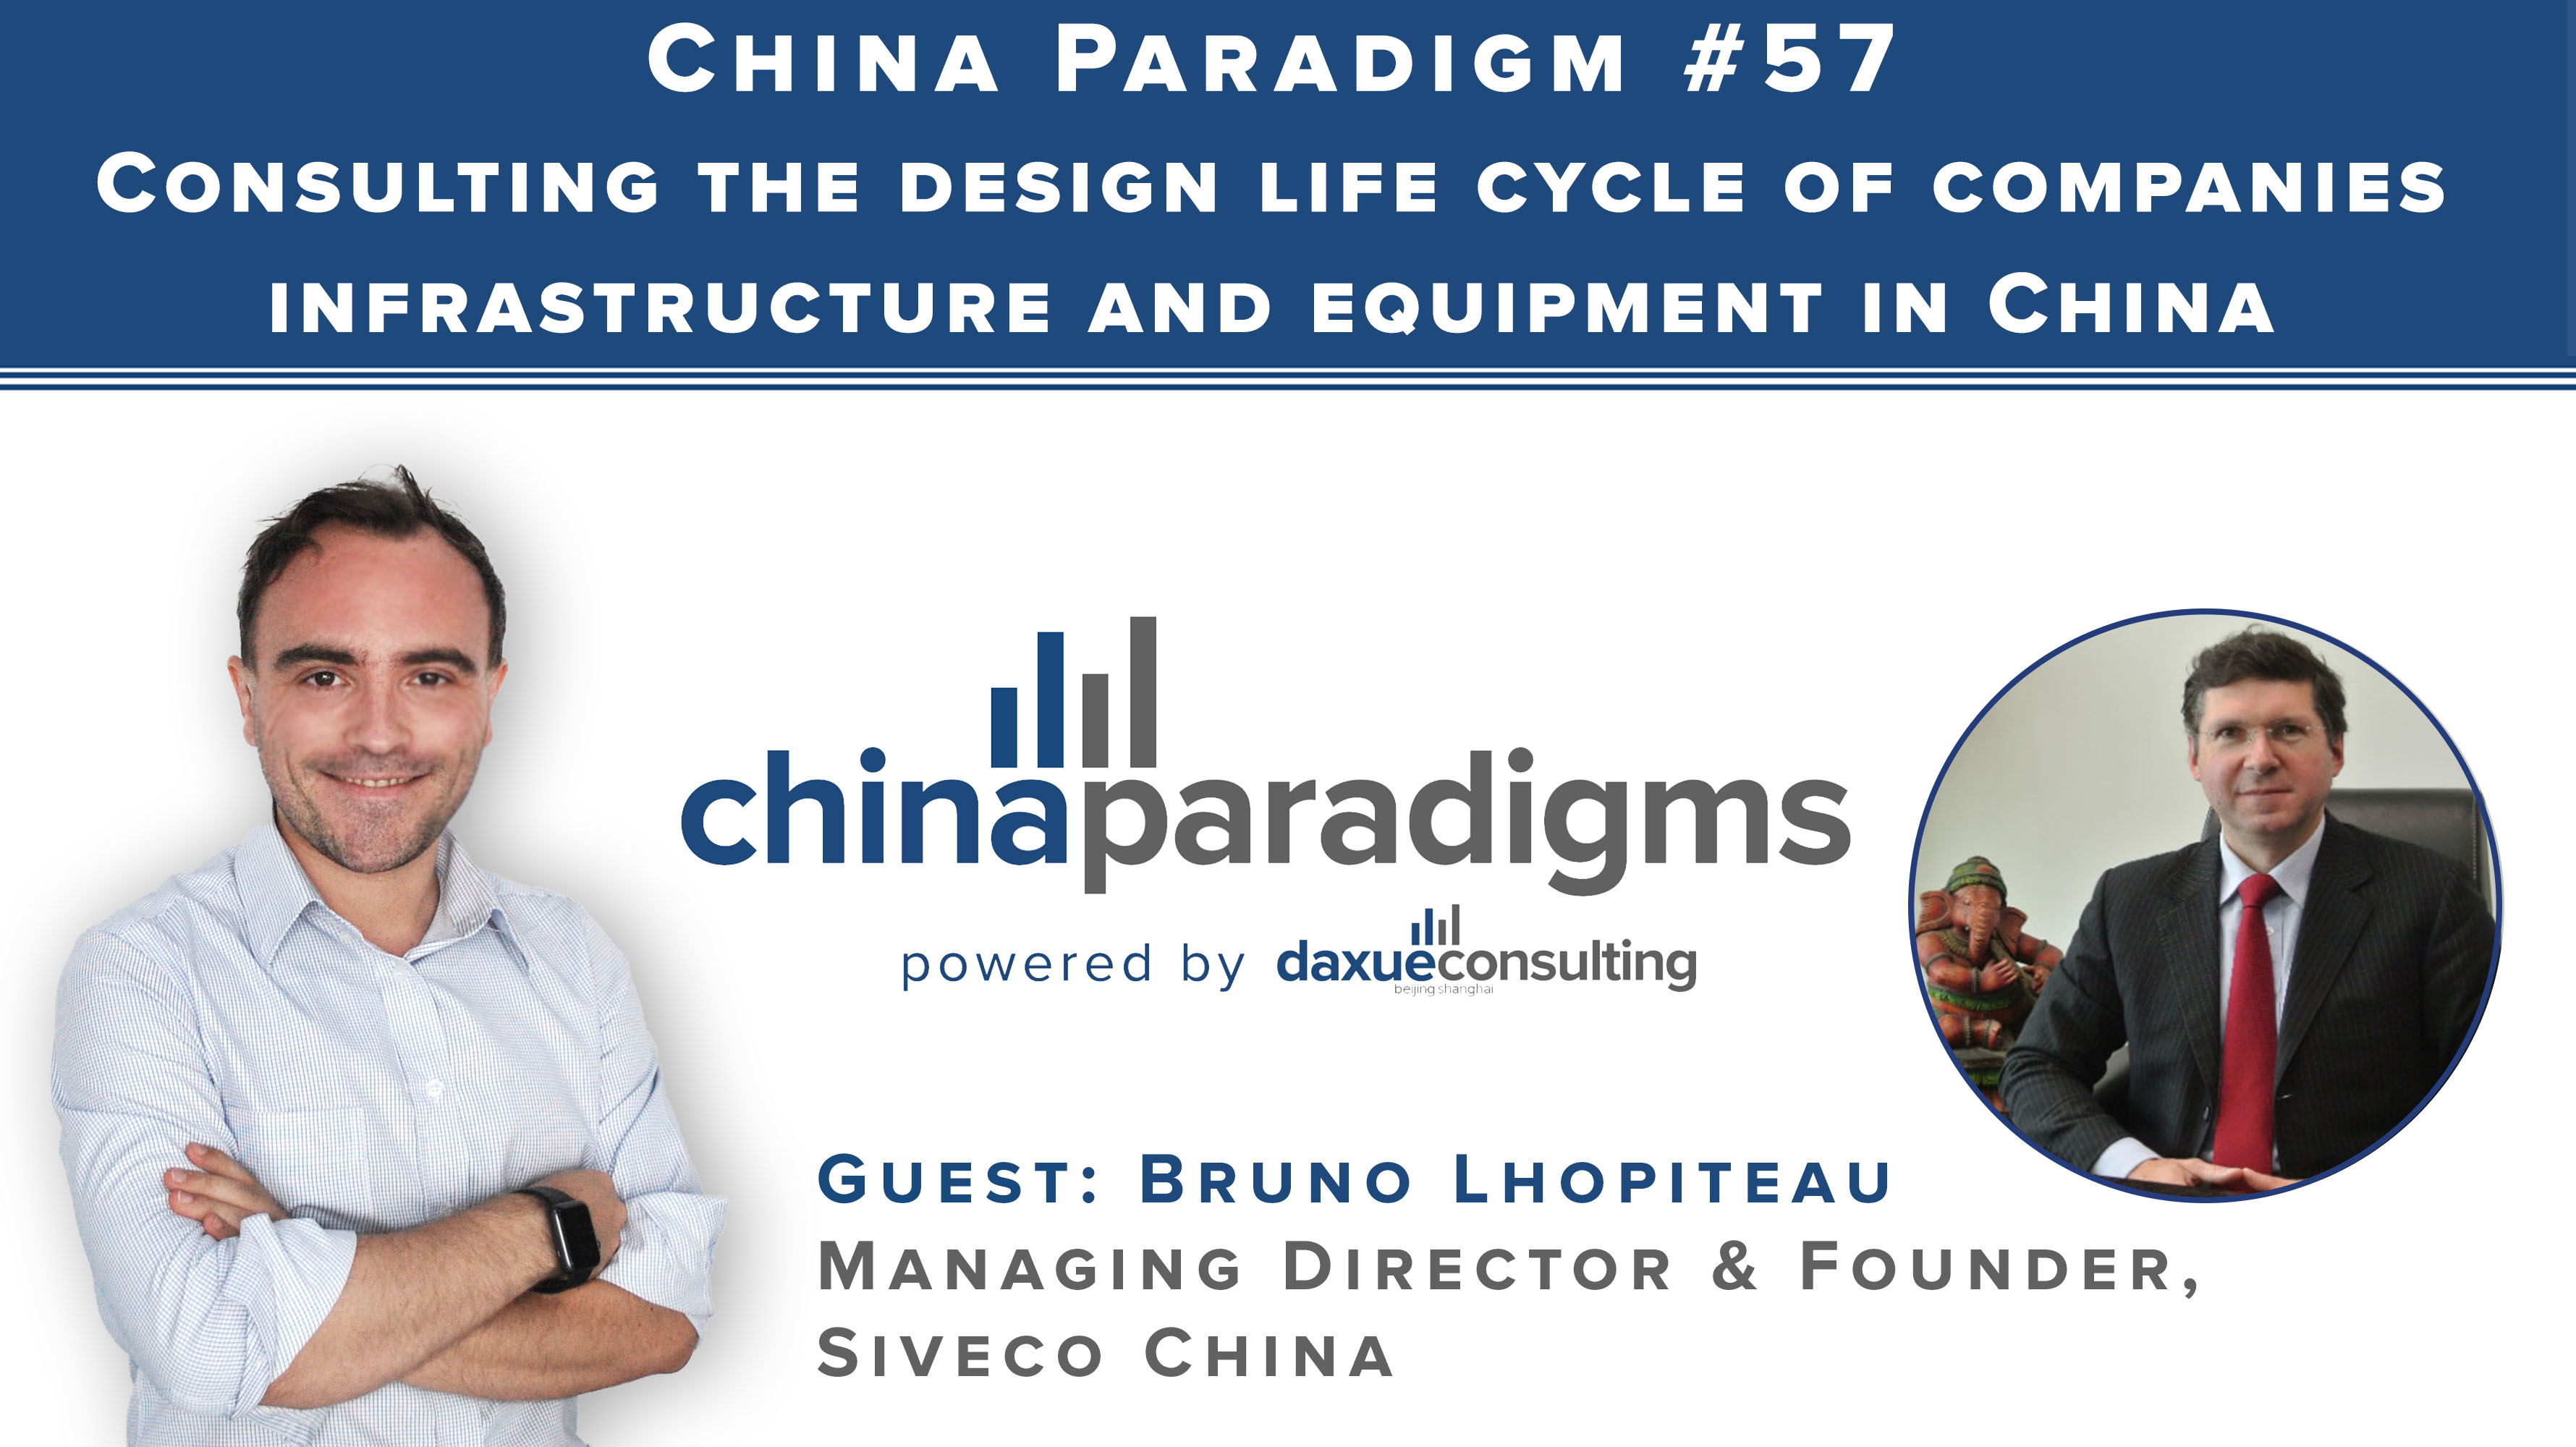 China Paradigm 57: Optimizing business in China with maintenance consulting